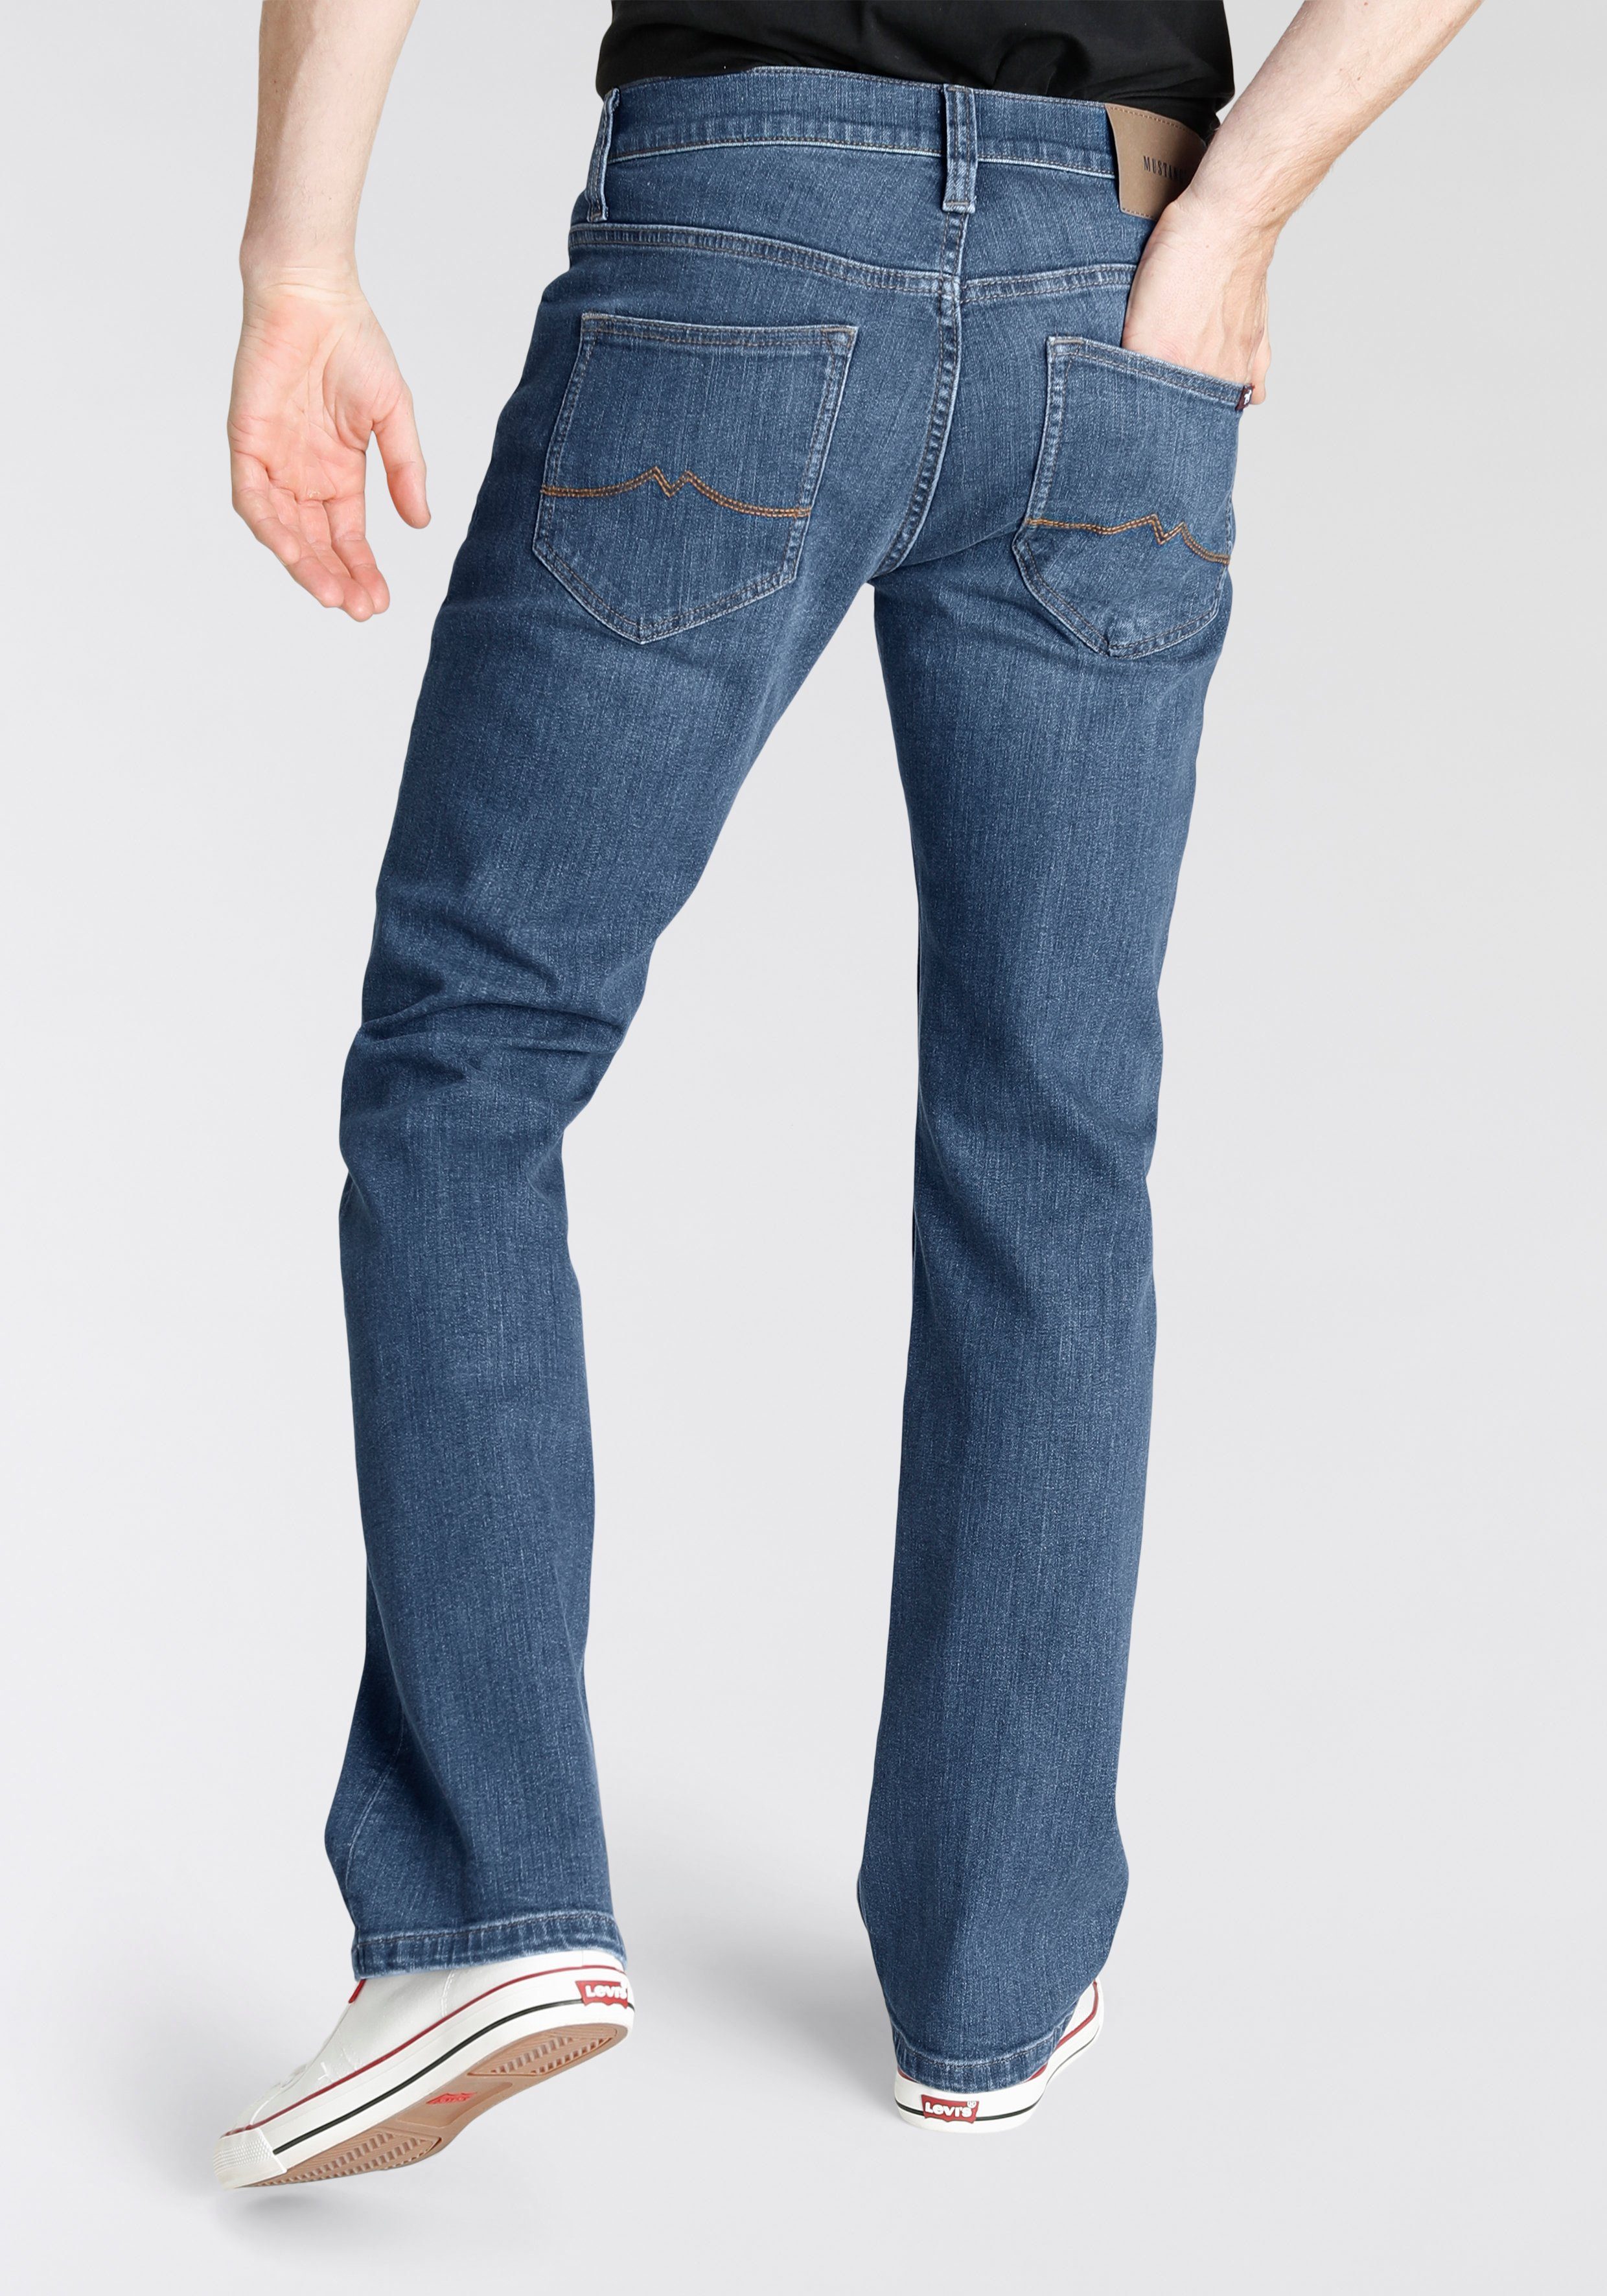 MUSTANG Bootcut-Jeans STYLE OREGON dark blue wash BOOTCUT